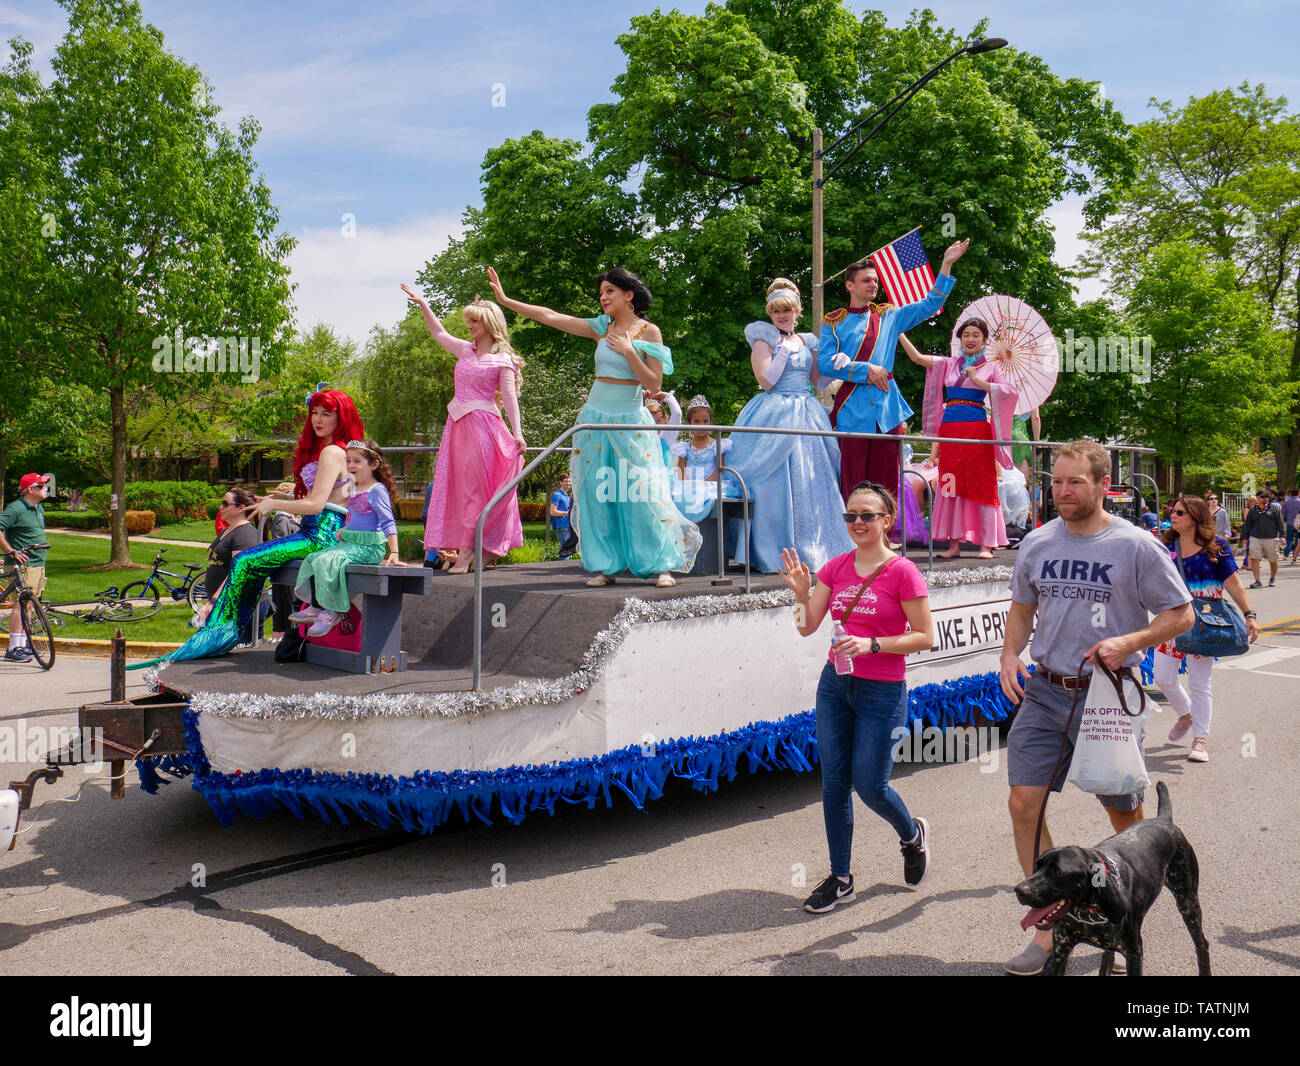 River Forest, Illinois, USA. 28th May, 2019. A float of portrayals of Disney princesses at today's Memorial Day Parade in this suburb west of Chicago. Stock Photo